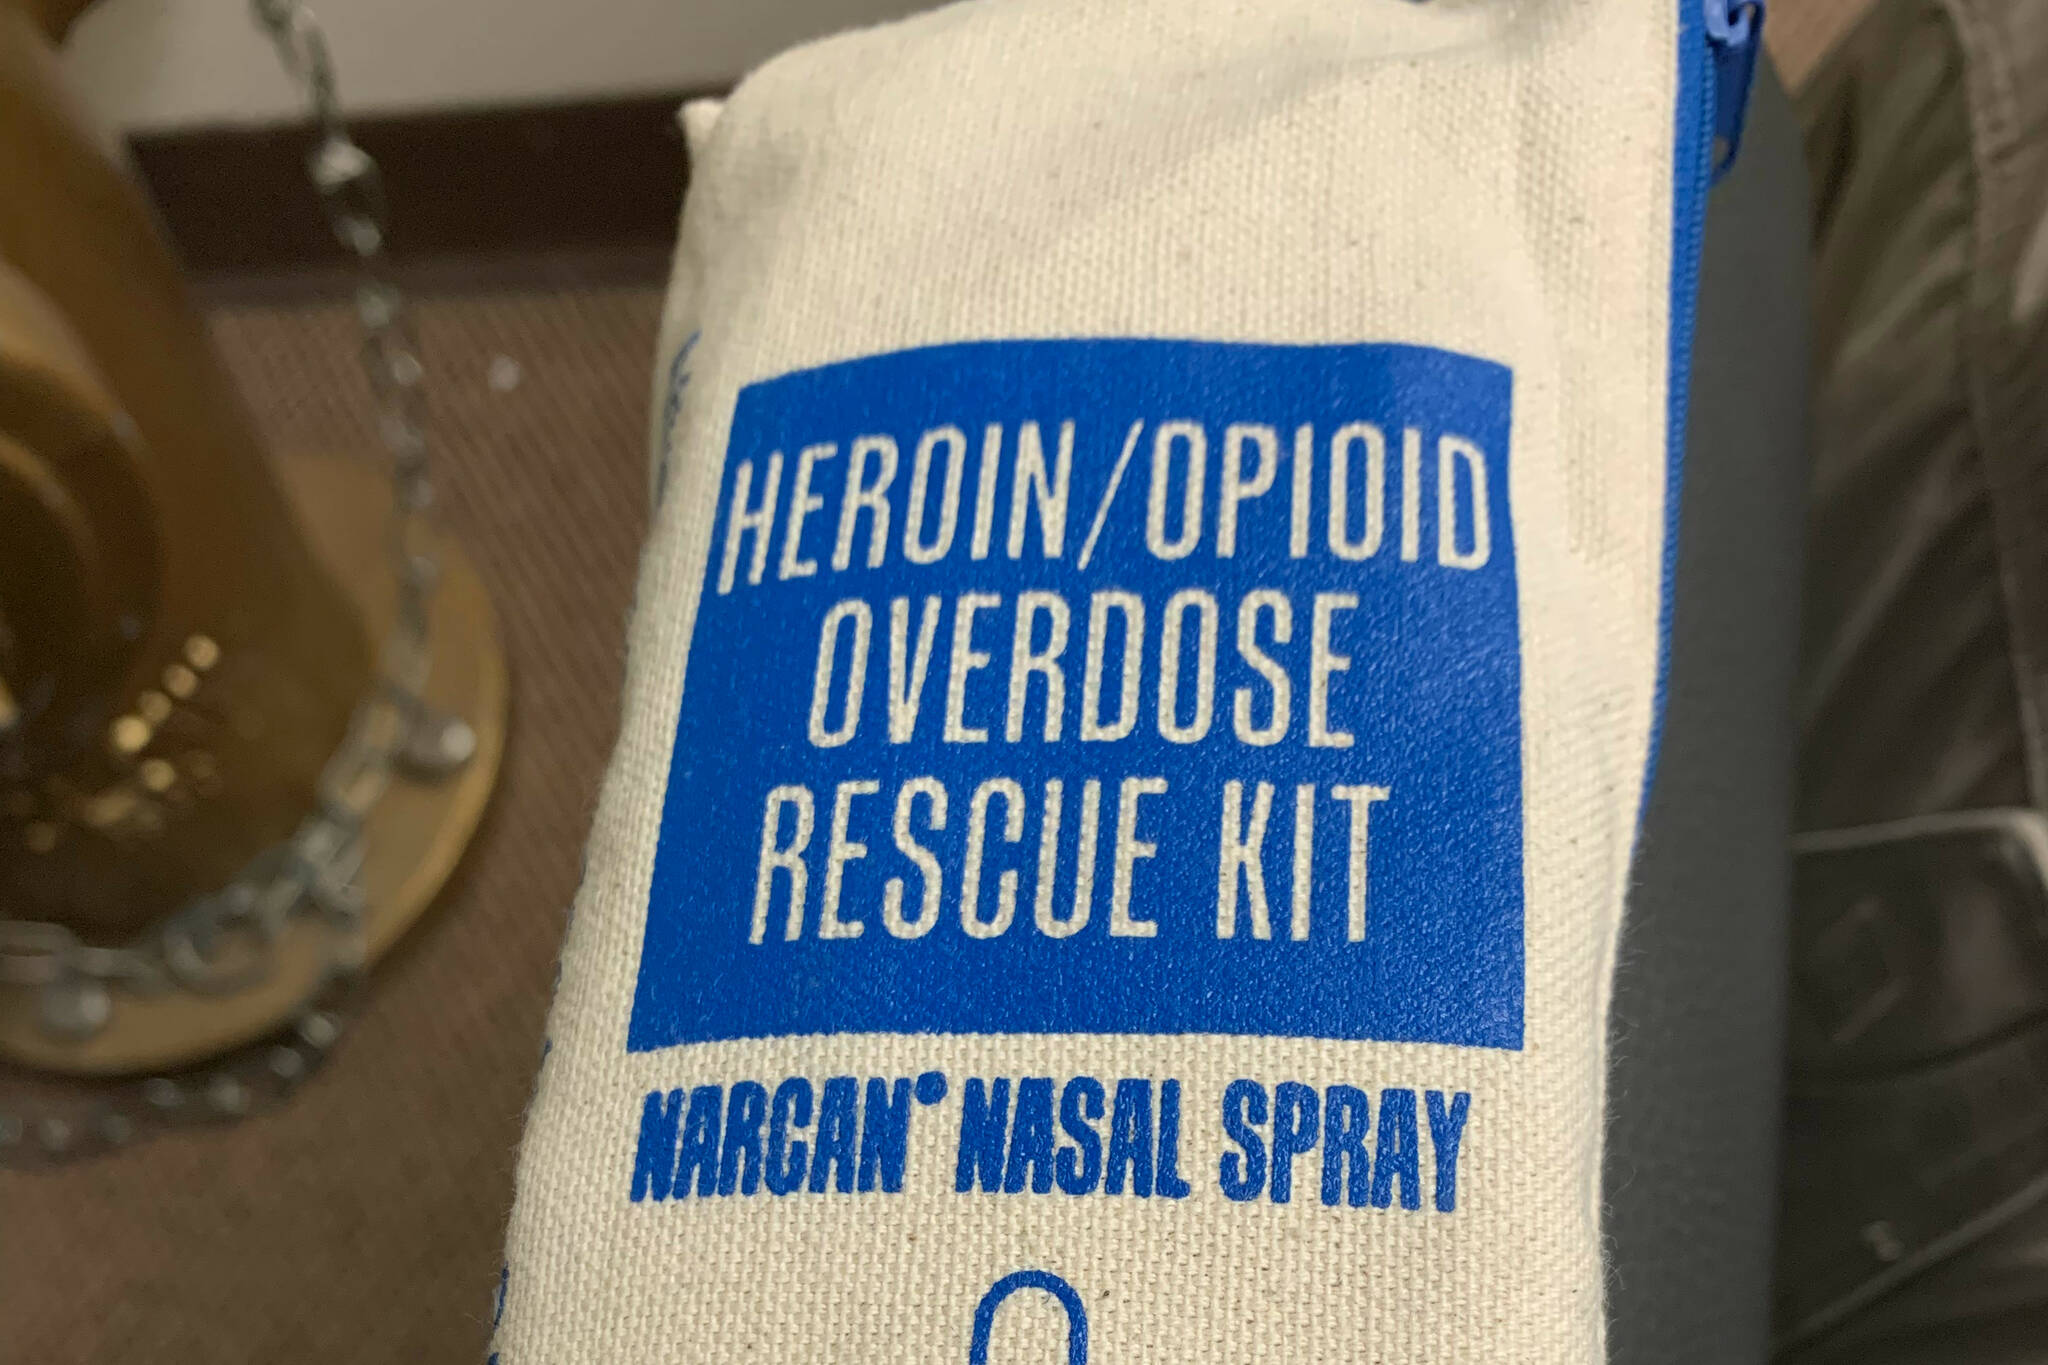 Capital City Fire/Rescue has received 100 Narcan kits to start to distribute to community members who need them beginning in March. (Courtesy photo / CCFR)